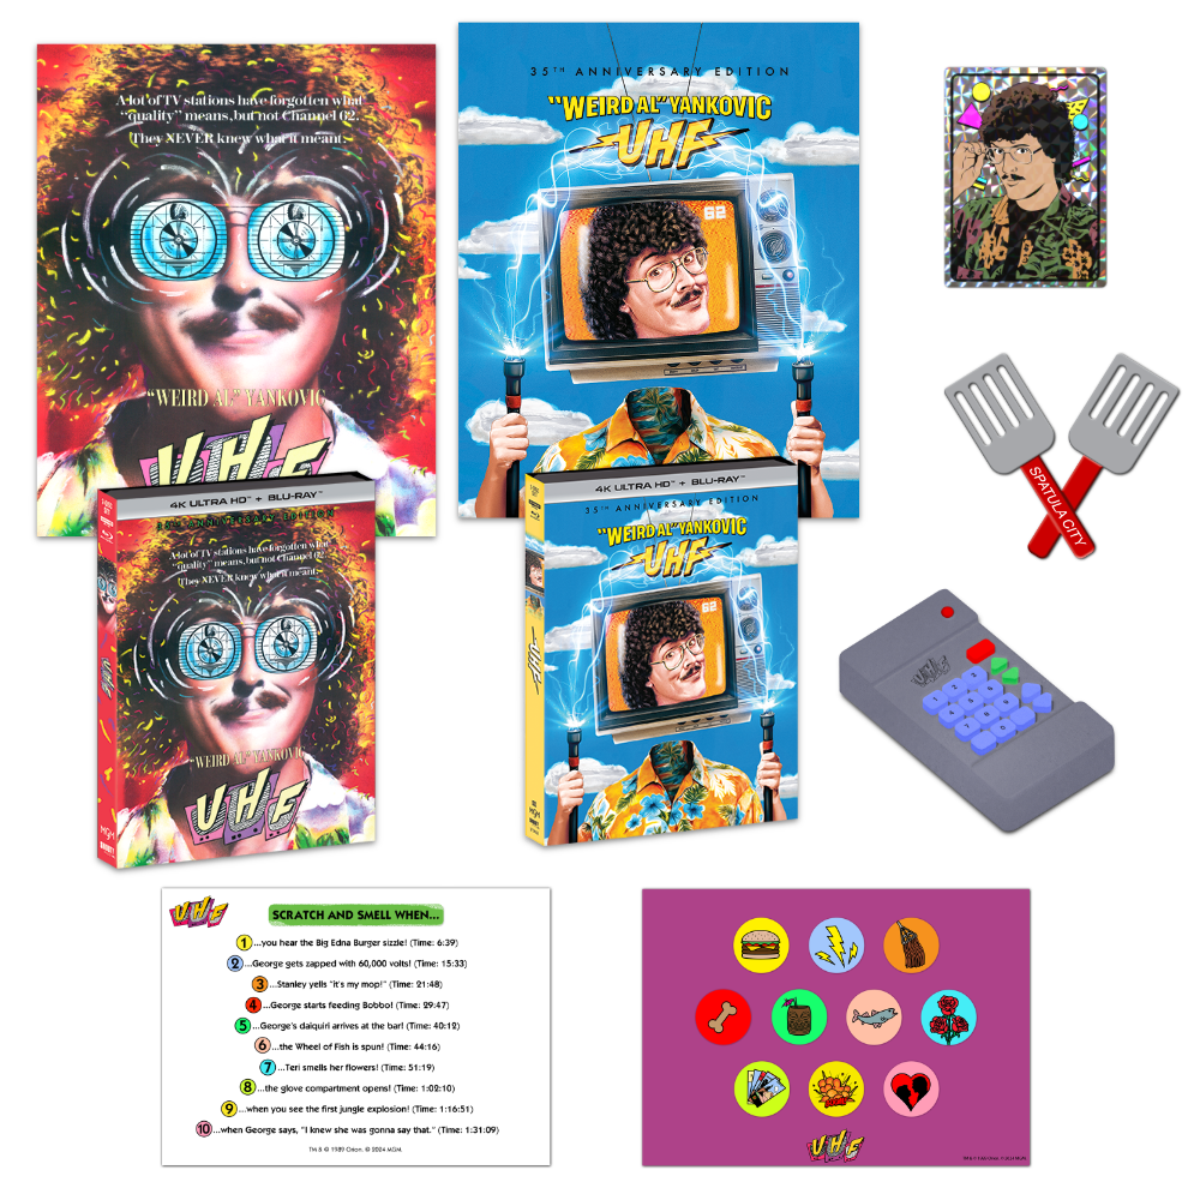 UHF [35th Anniversary Edition] + 2 Posters + Slipcover + Prism Sticker + Scratch & Sniff Sheet - Shout! Factory